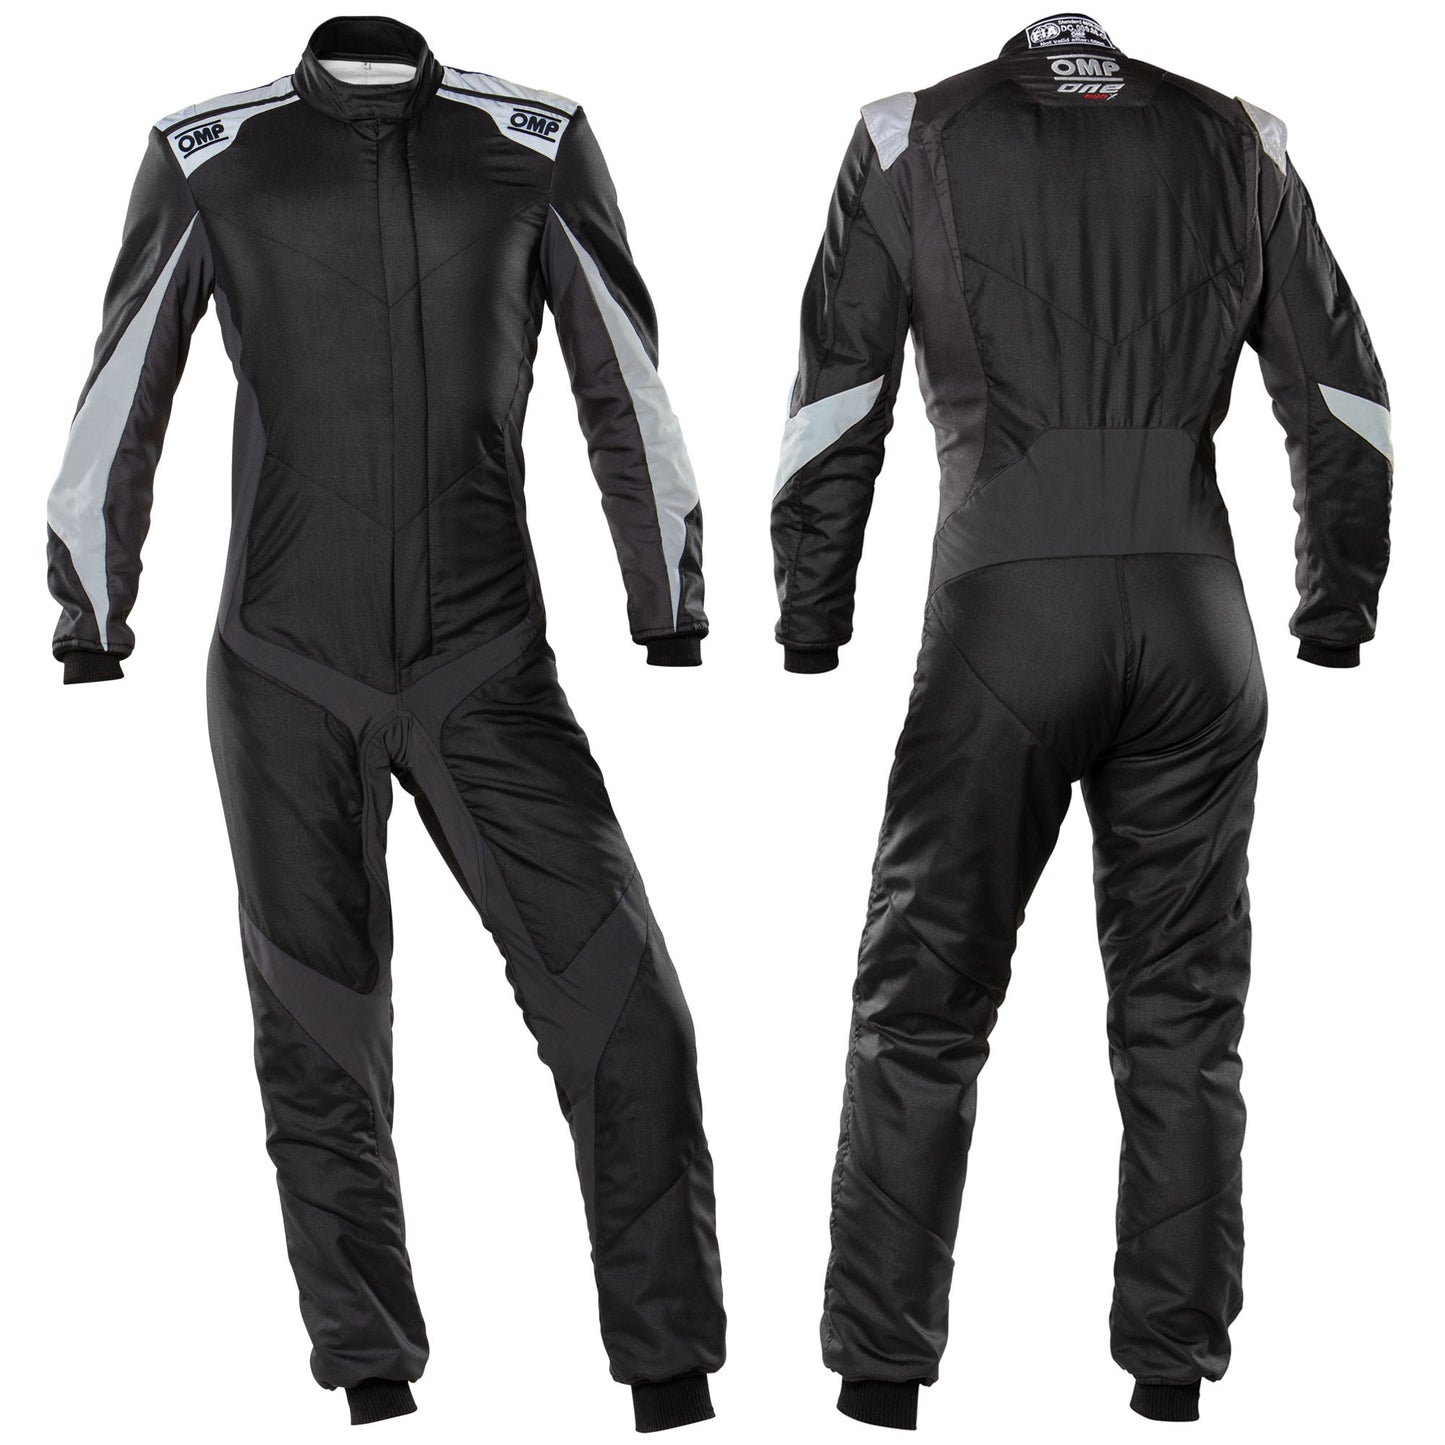 OMP Evo X Race Suit Professional Ultra-Light FIA 8856-2018 Approved Fireproof